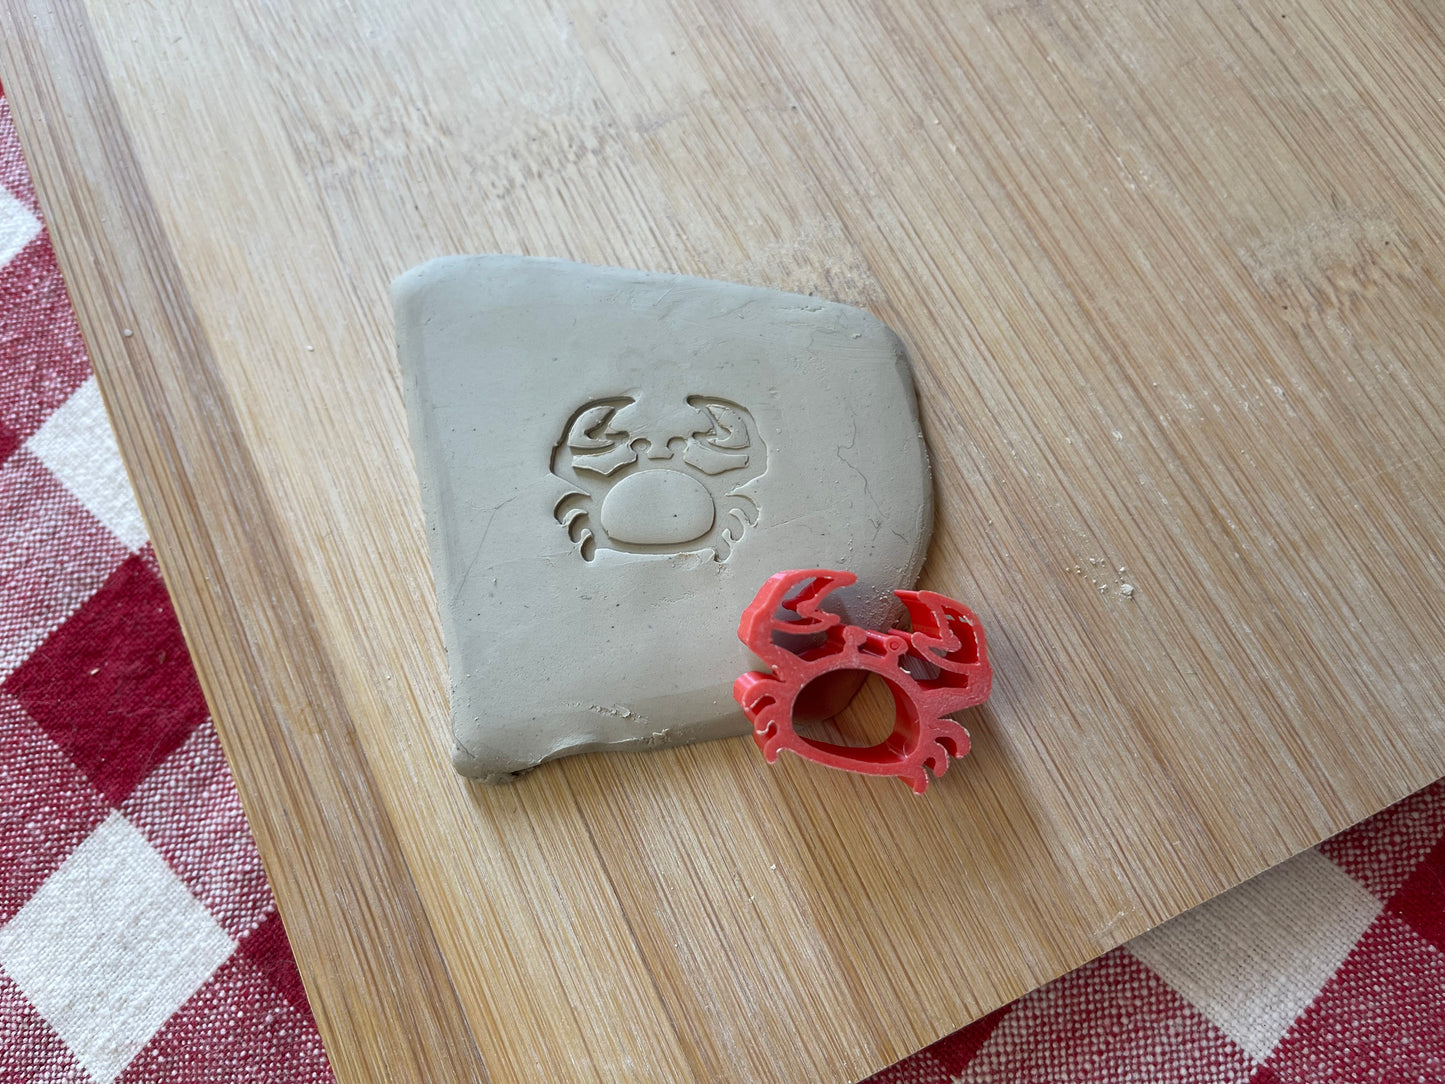 Crab Mini Pottery Stamp - Alabama Clay Conference, plastic 3D printed, multiple sizes